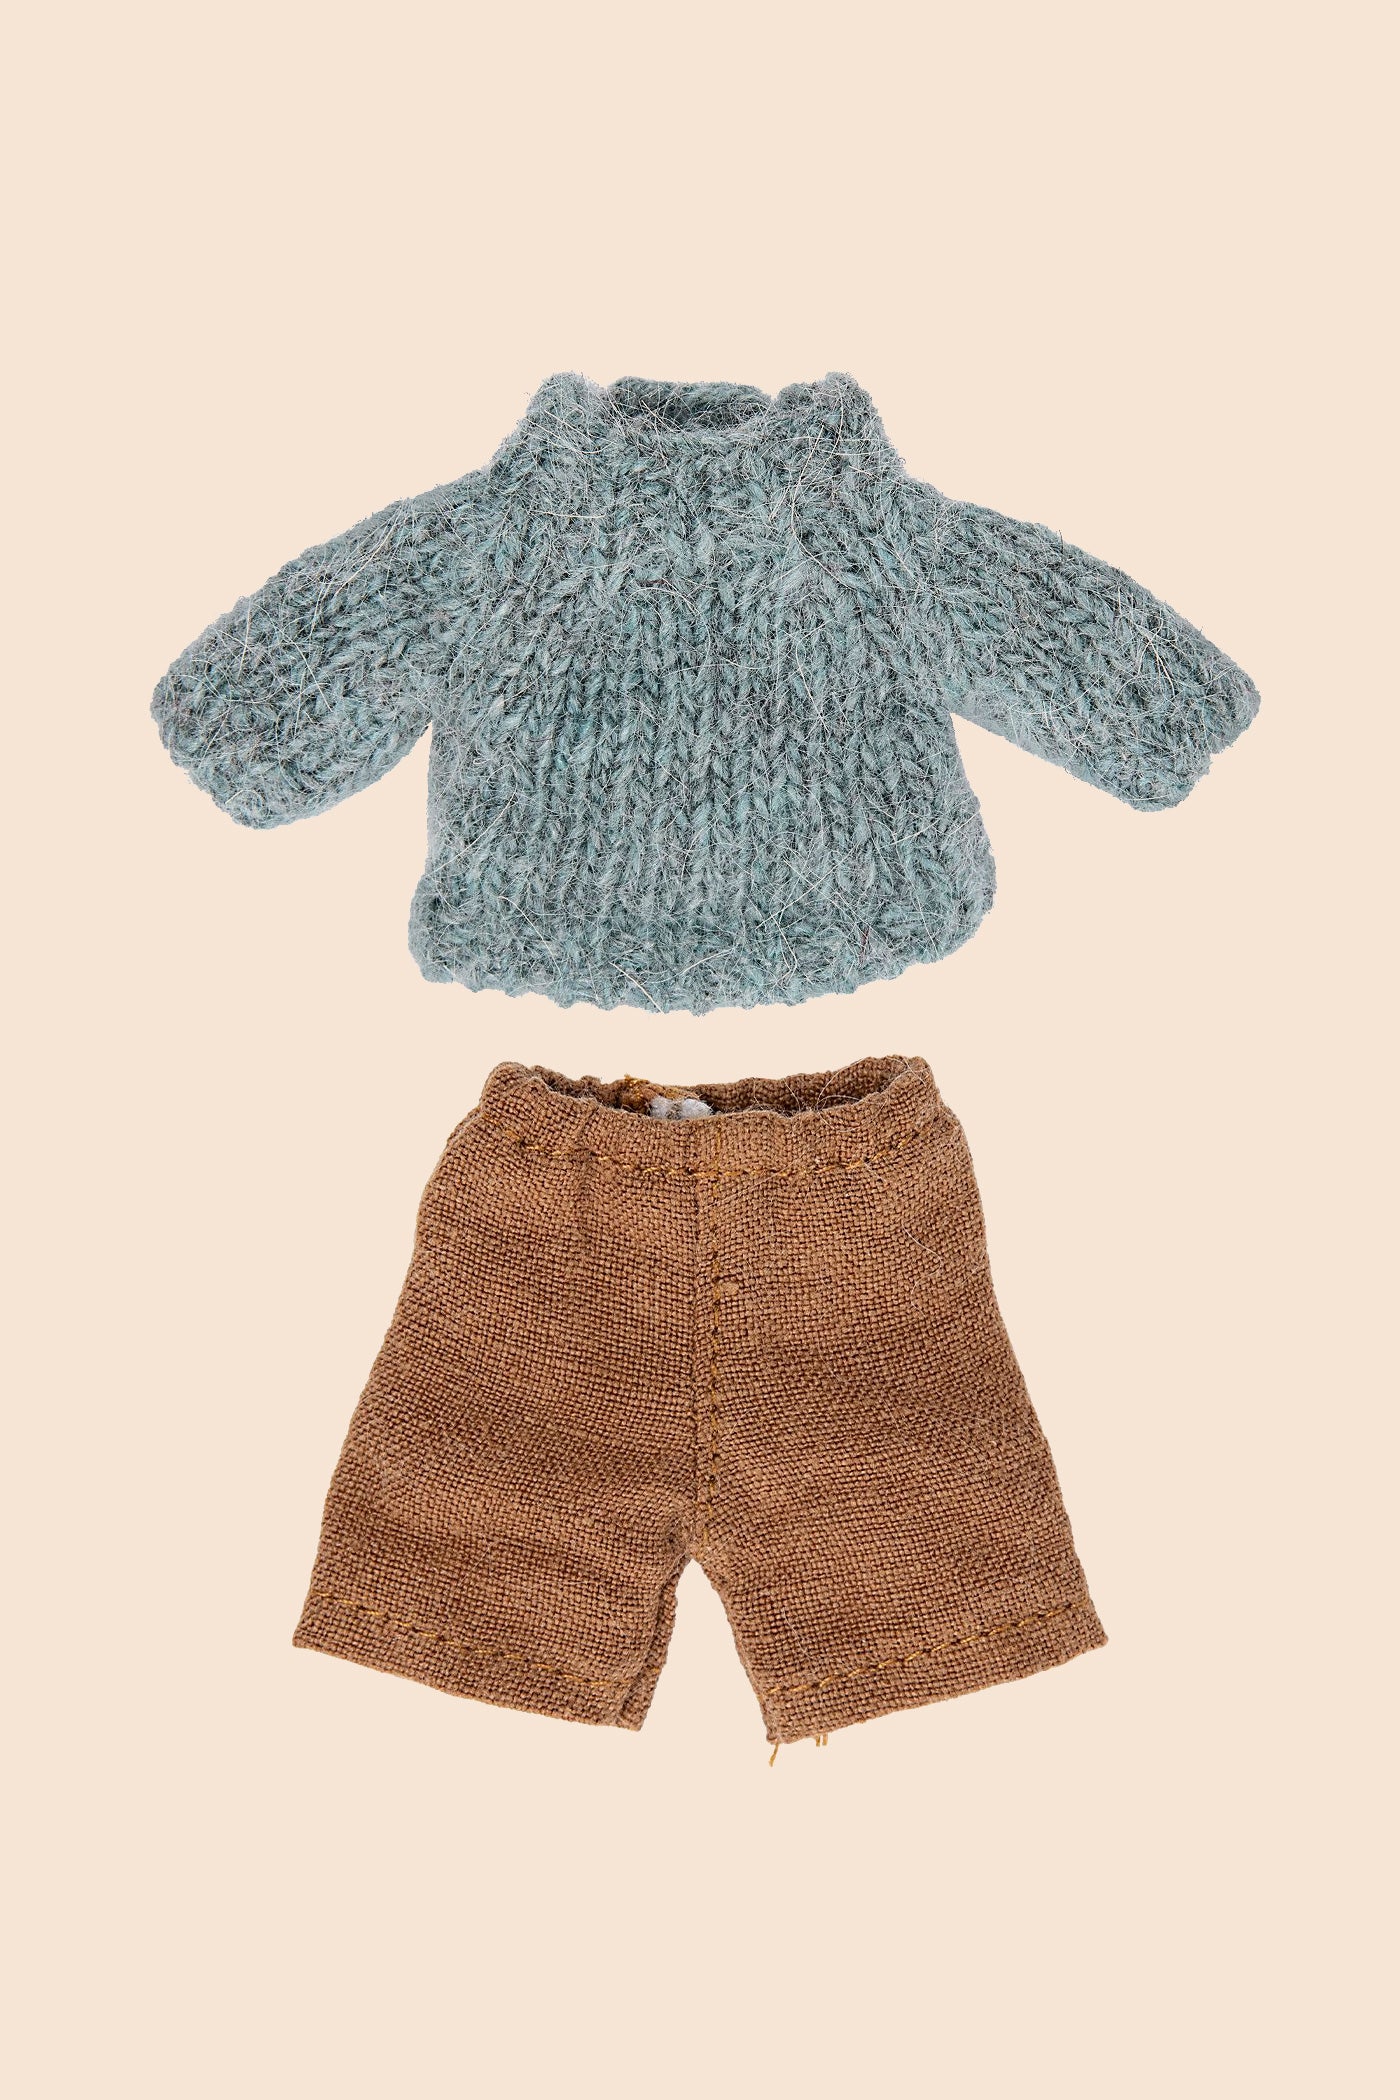 Maileg Knitted Sweater and Pants for Big Brother - Clothes